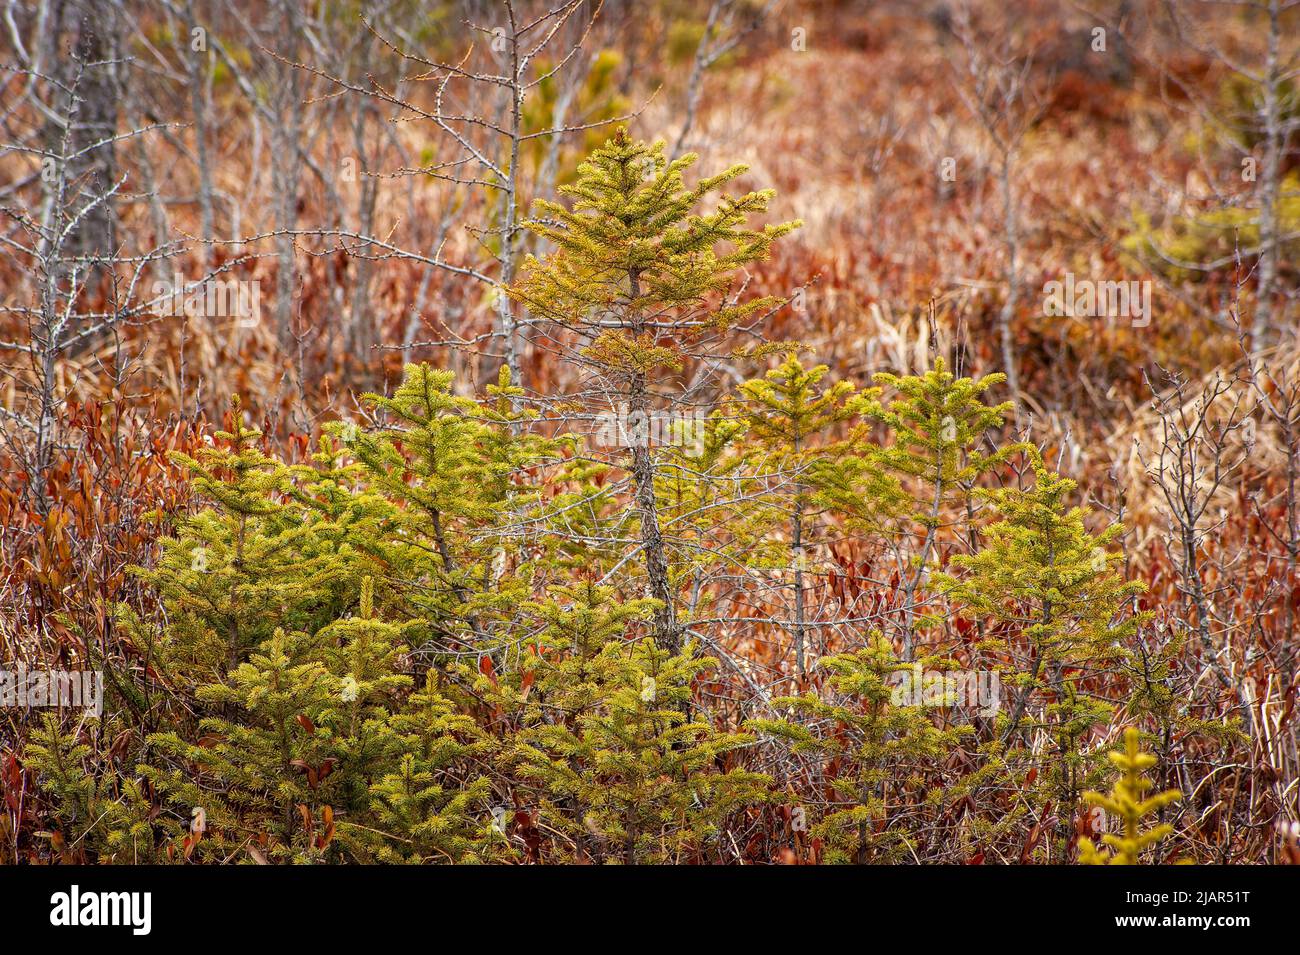 Black Spruce growing in Heron Marsh, amidst leatherleaf shrubs (Chamaedaphne calyculata). The tree is stunted due the low nutrients in the acidic peat Stock Photo